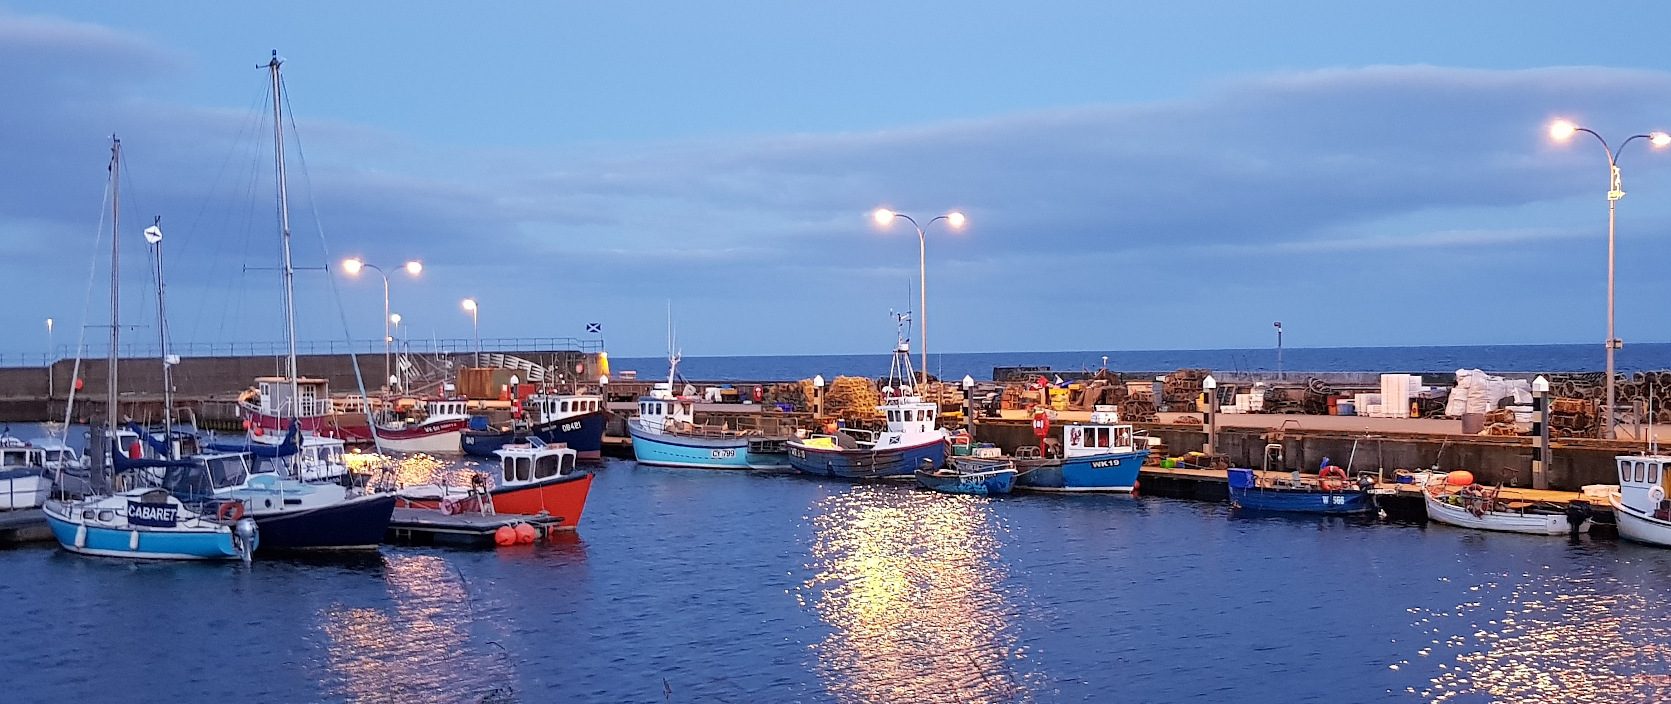 Helmsdale Harbour at night